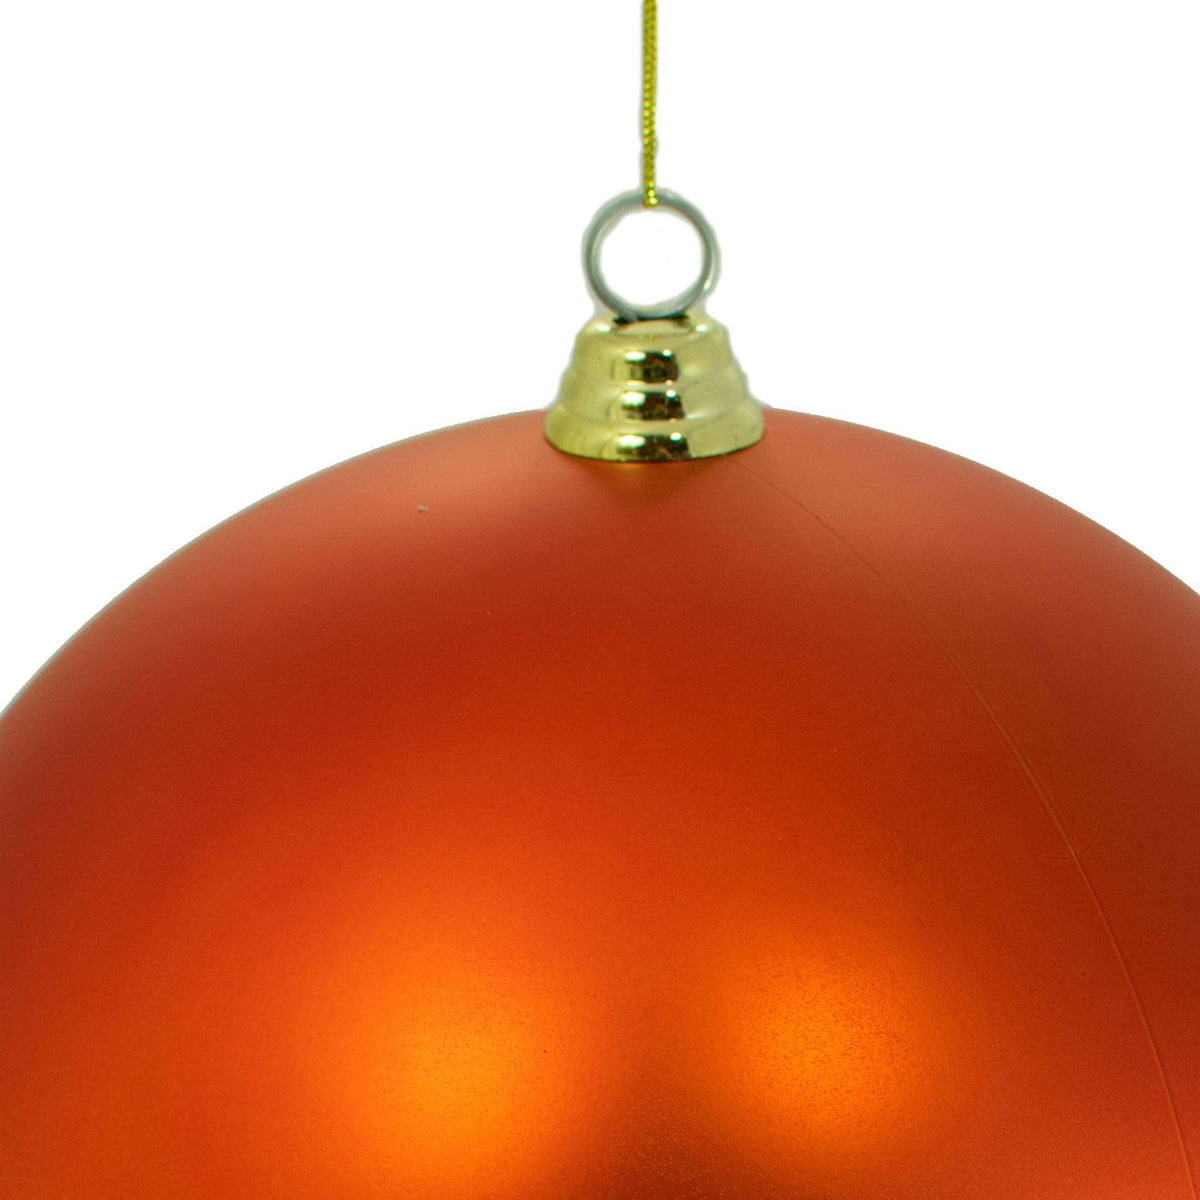 Top of the Matte Orange Ball Ornament with a gold plastic cap and hanging string.